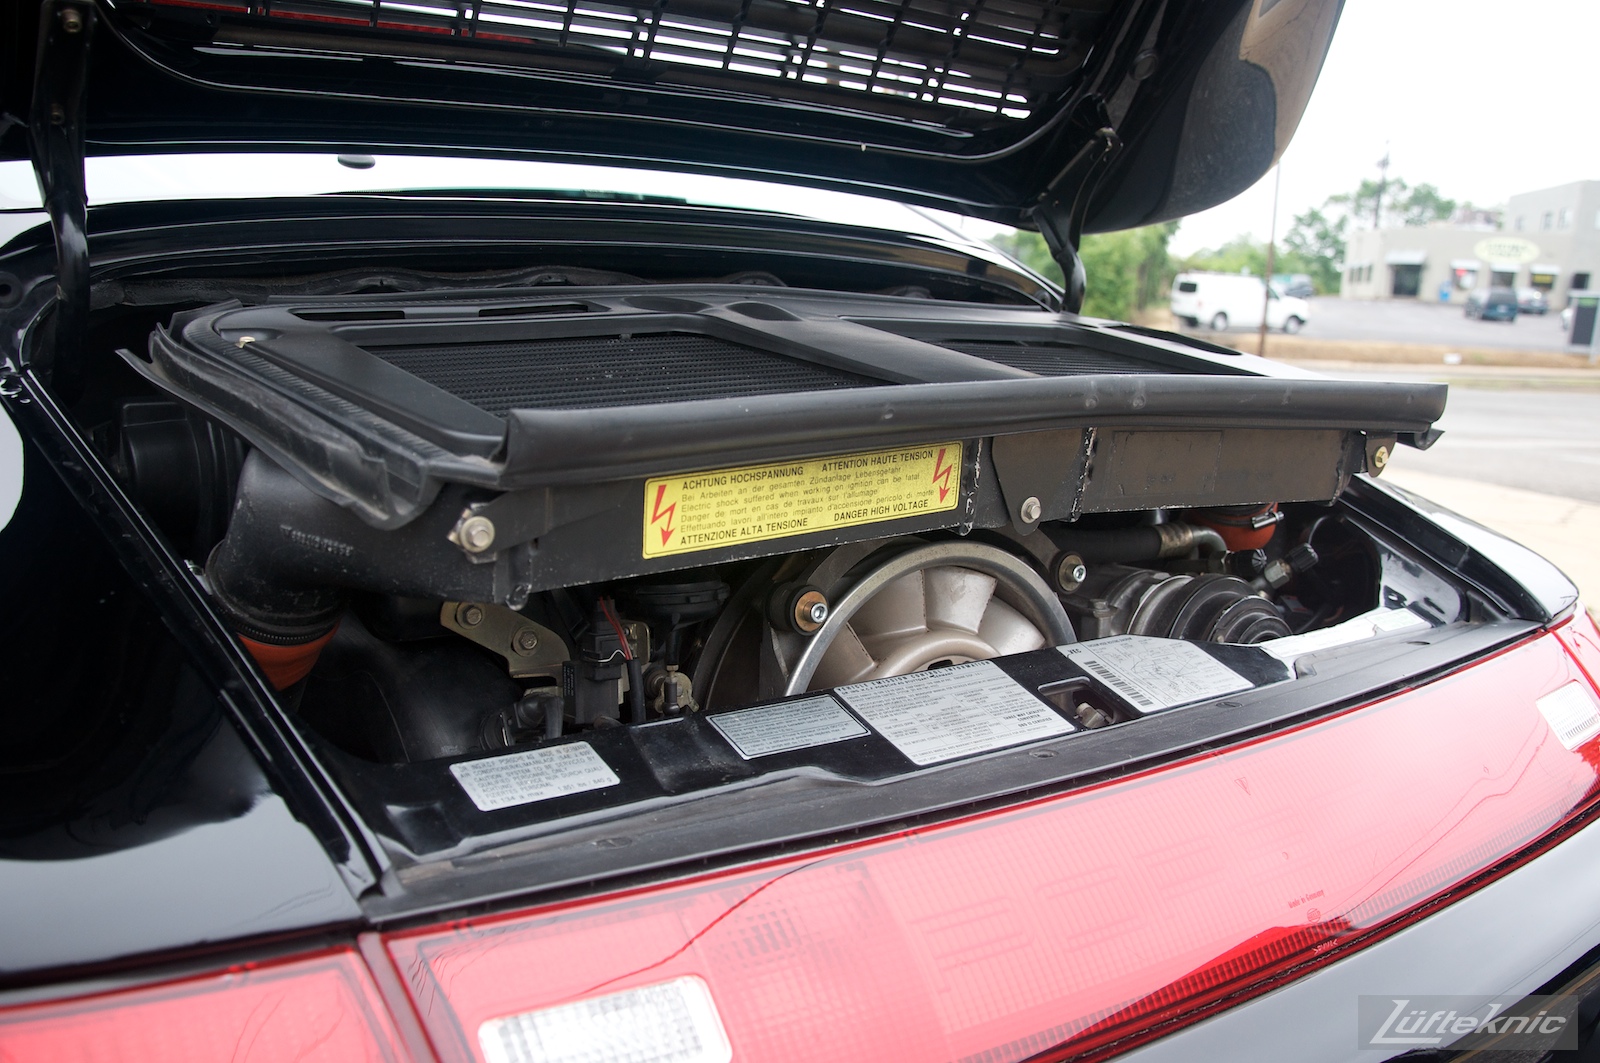 A 993 Turbo with the decklid open showing the large intercoolers.